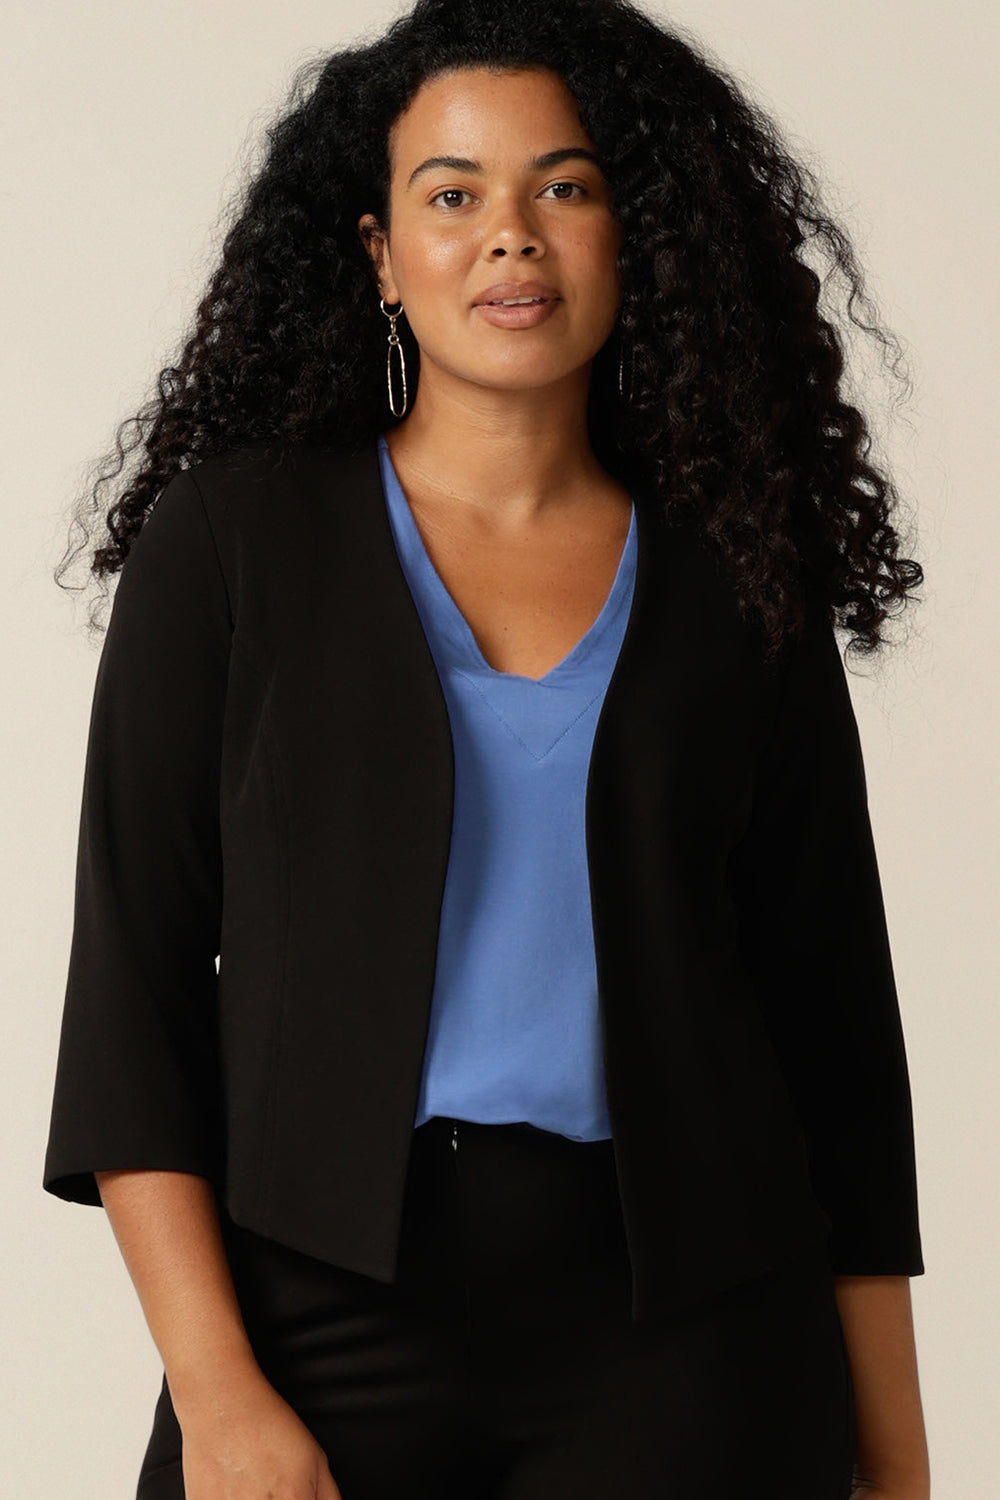 A curvy size 12 woman wears a black jacket as work wear. A soft tailoring jacket in stretch jersey, the Rainy Jacket is collarless and open-fronted with cropped sleeves. The jacket is worn with black pants and a blue bamboo jersey top as comfortable work wear for women.